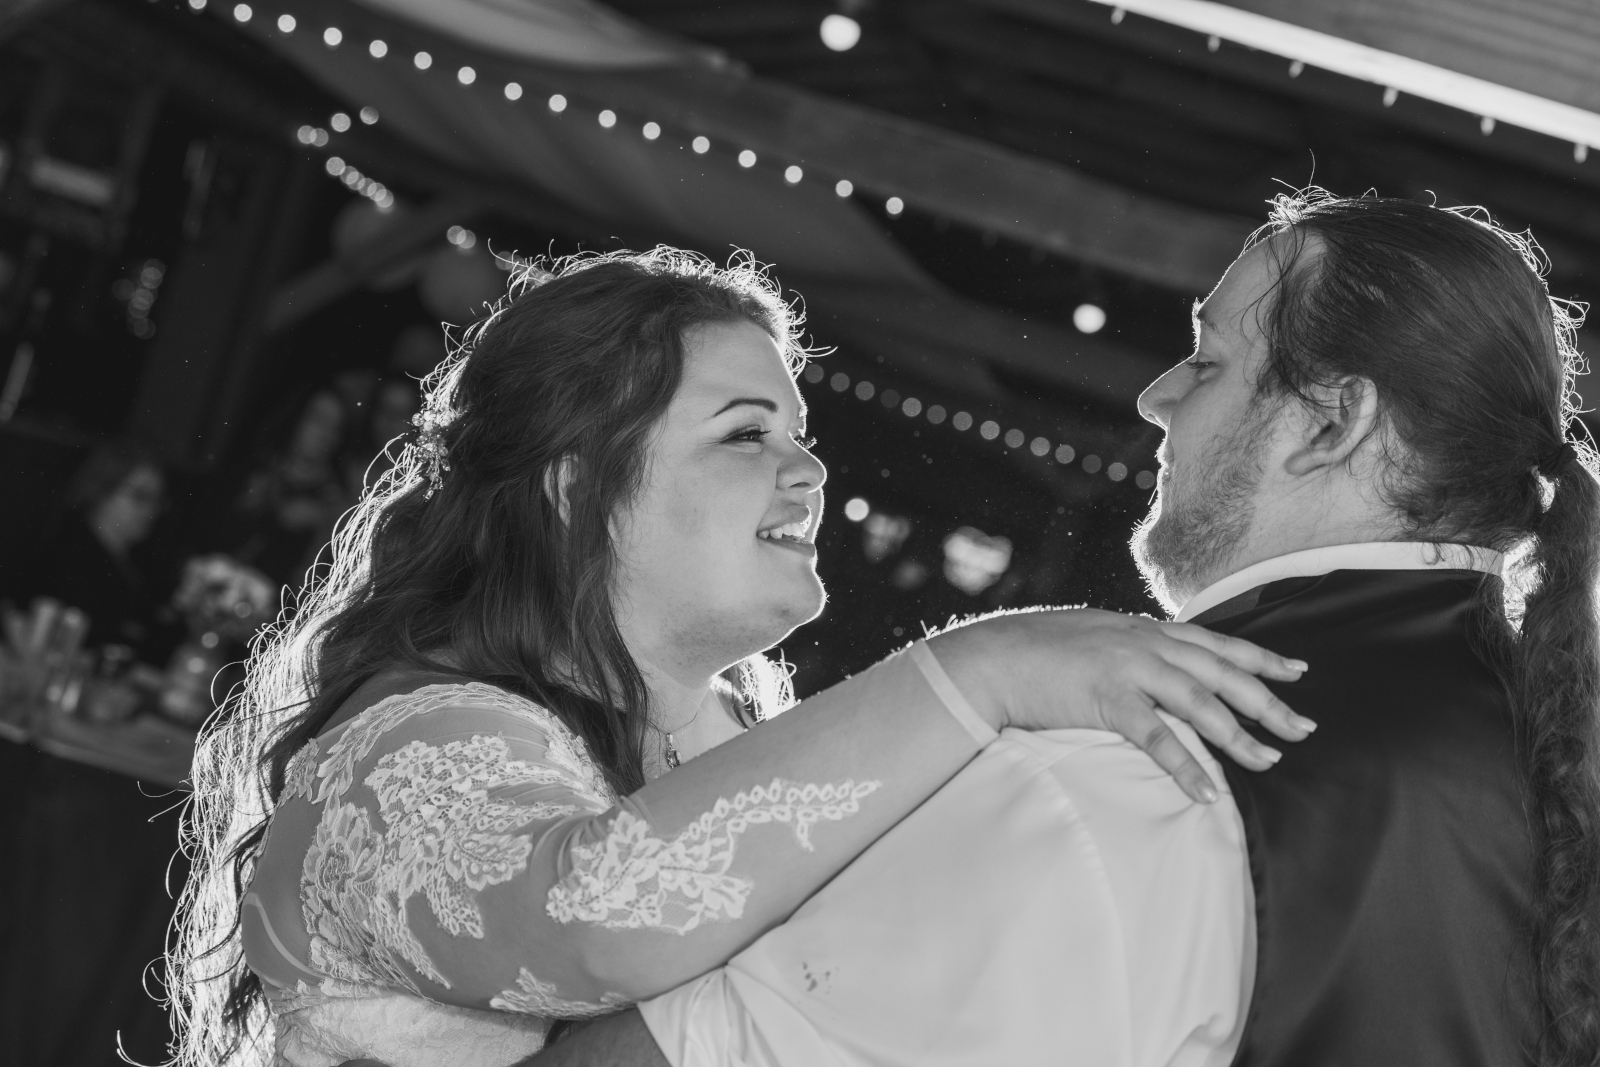 Bride and groom first dance, romantic, black and white, September wedding reception at Westfall Event Center